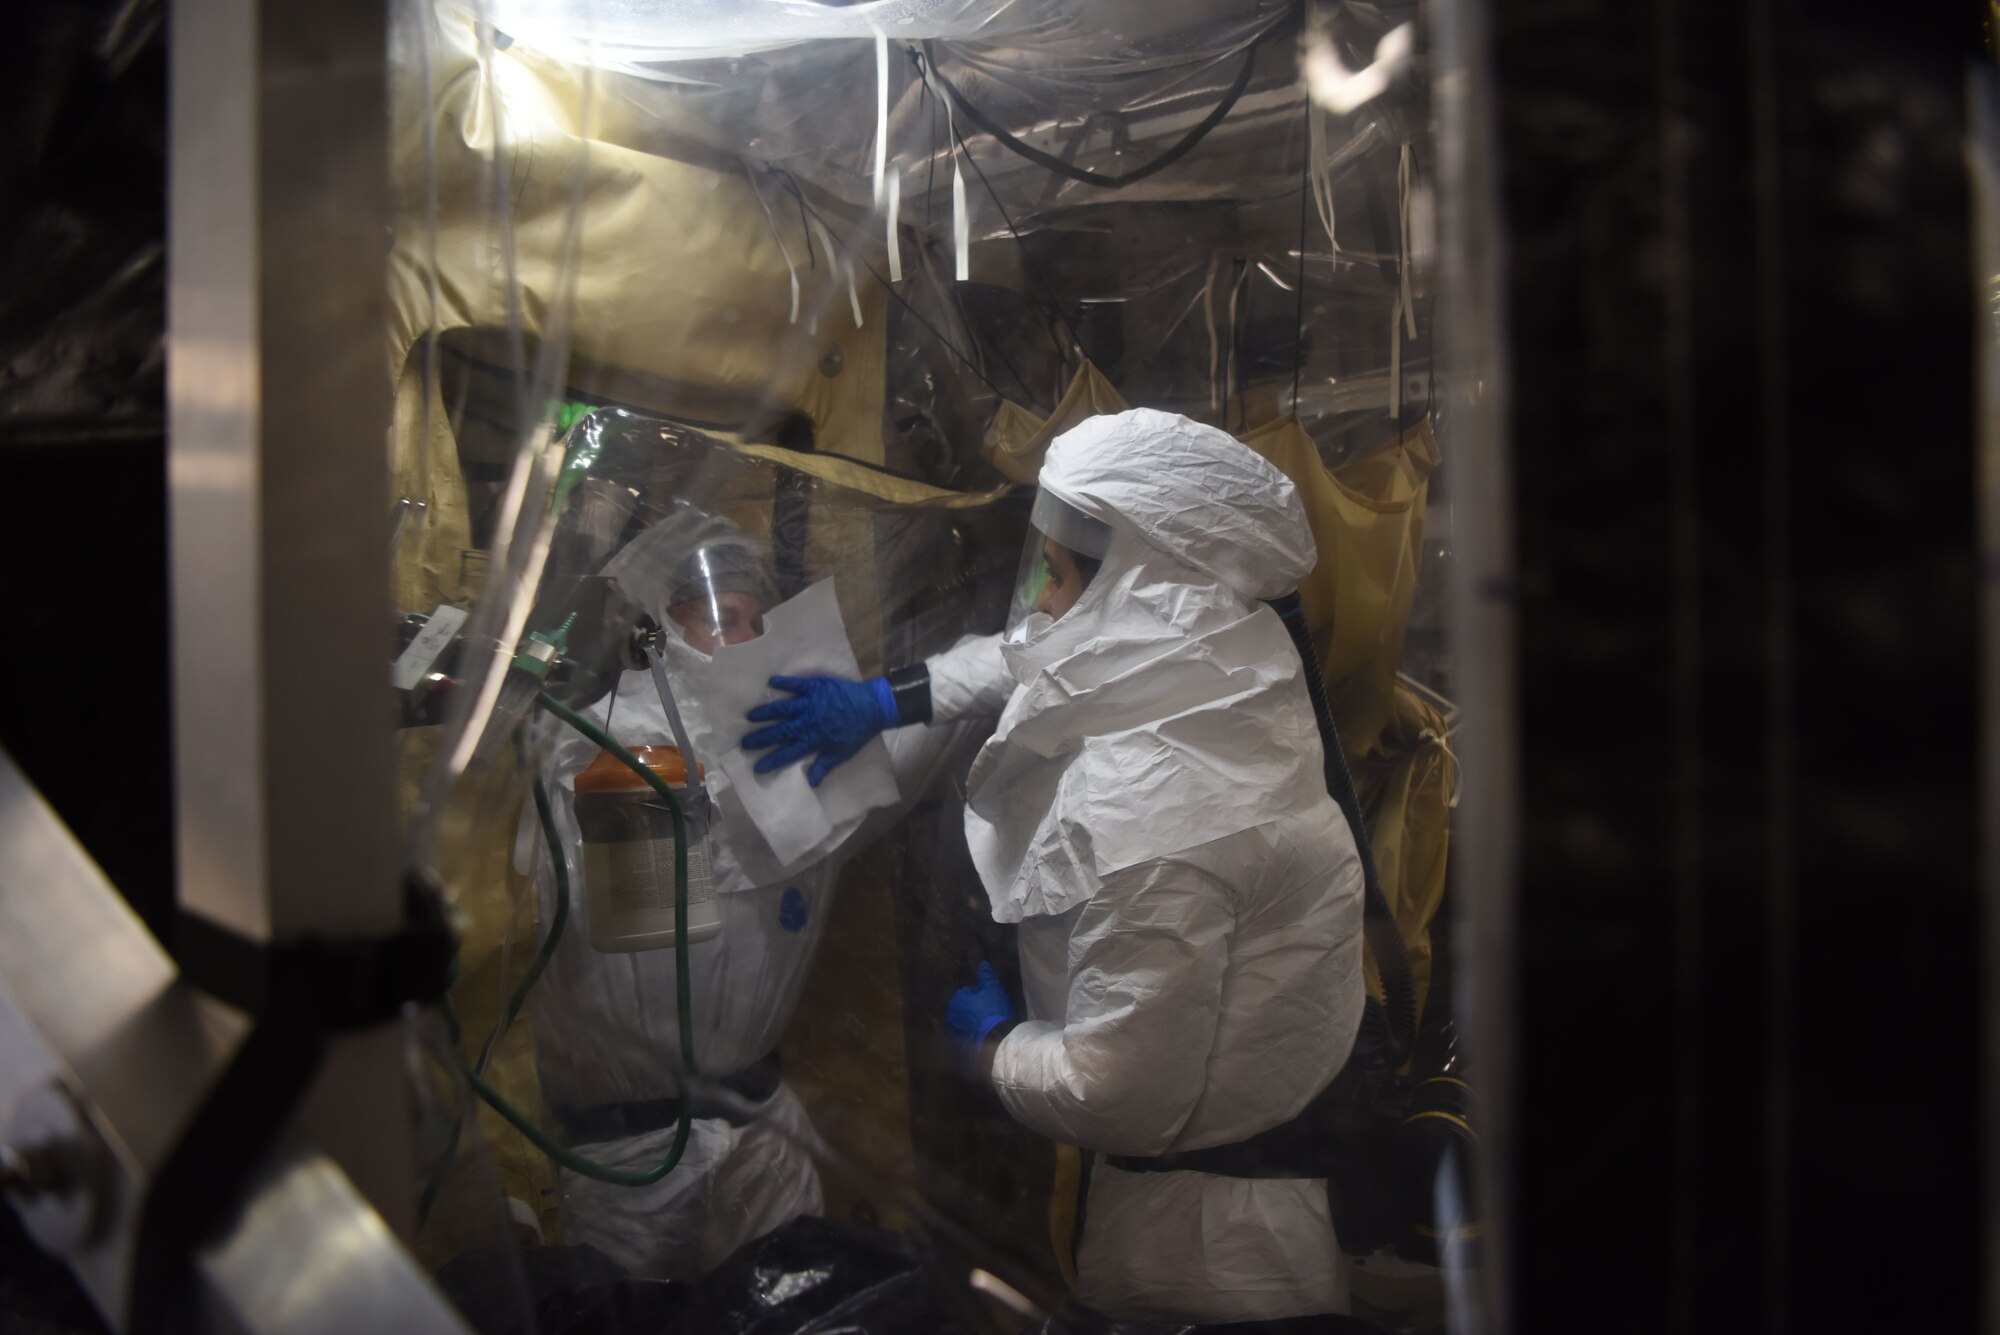 U.S. Air Force Senior Airman Jason McGhee, 313th Expeditionary Operations Support Squadron biomedical equipment technician, left, and Senior Airman Antonio Candler, 313th EOSS medical logistics, decontaminate a Transport Isolation System on a U.S. Air Force C-17 Globemaster III aircraft.